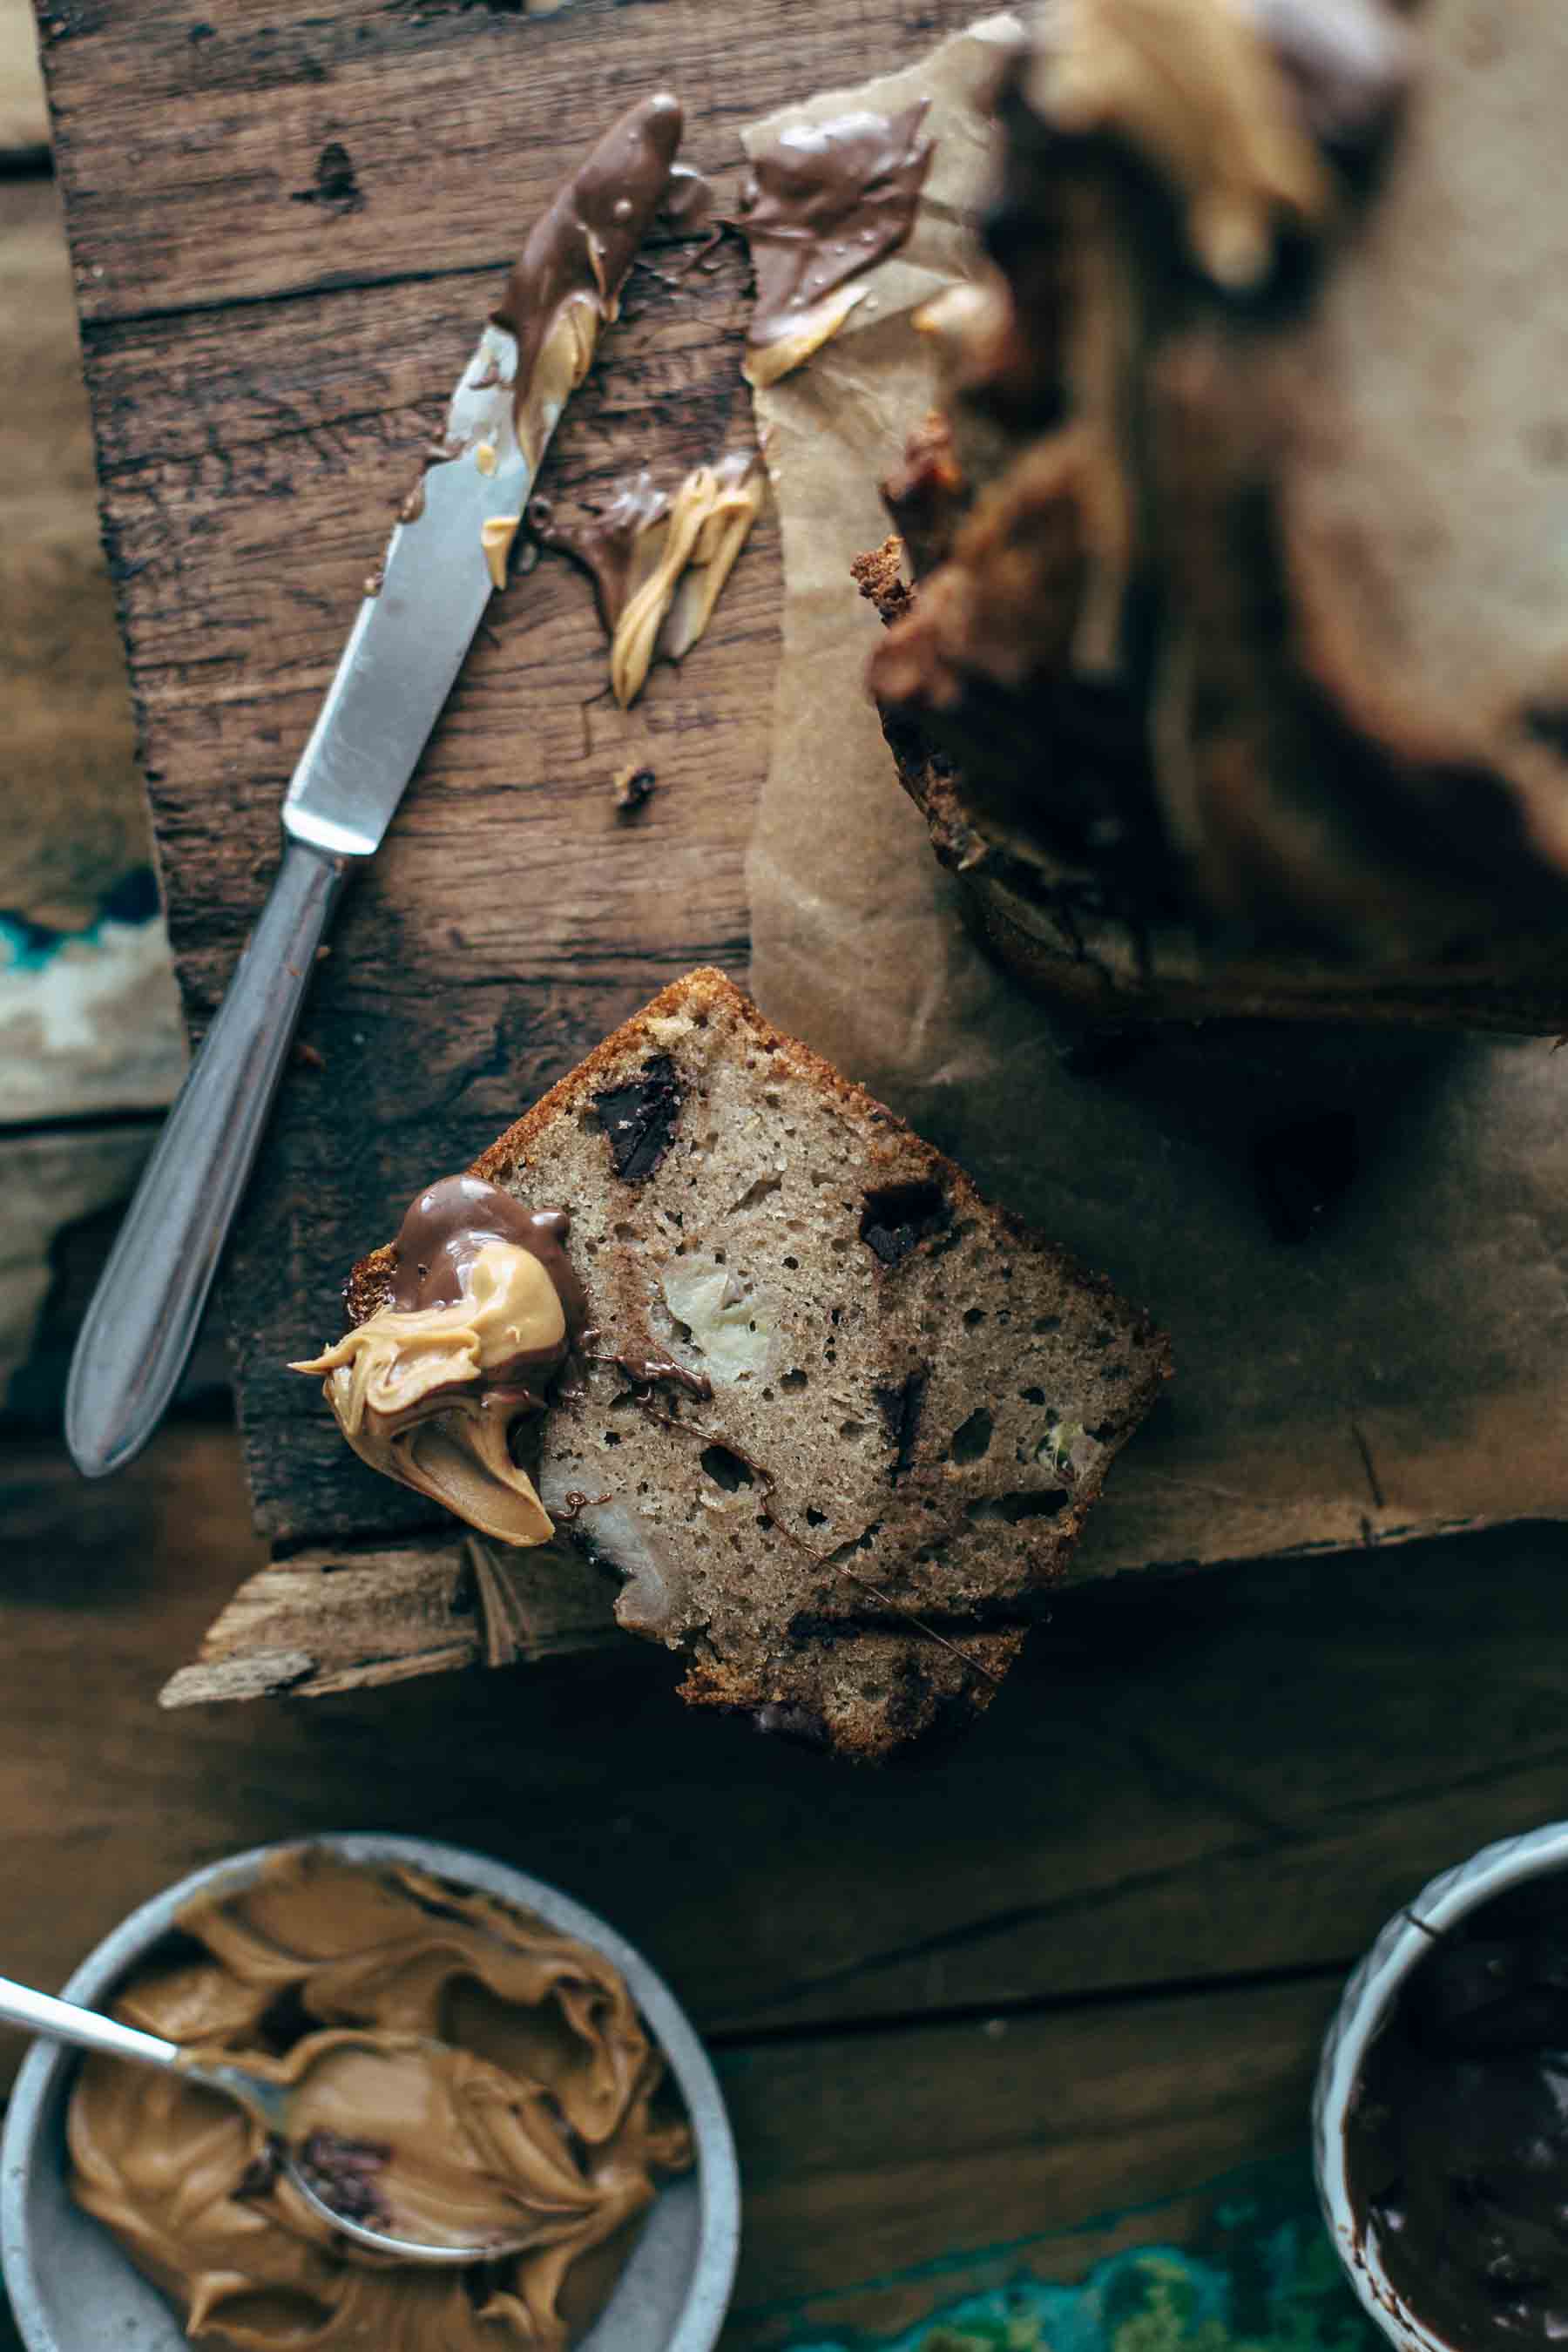 Cut Chocolate Peanut Butter Banana Bread slices on wood with knife